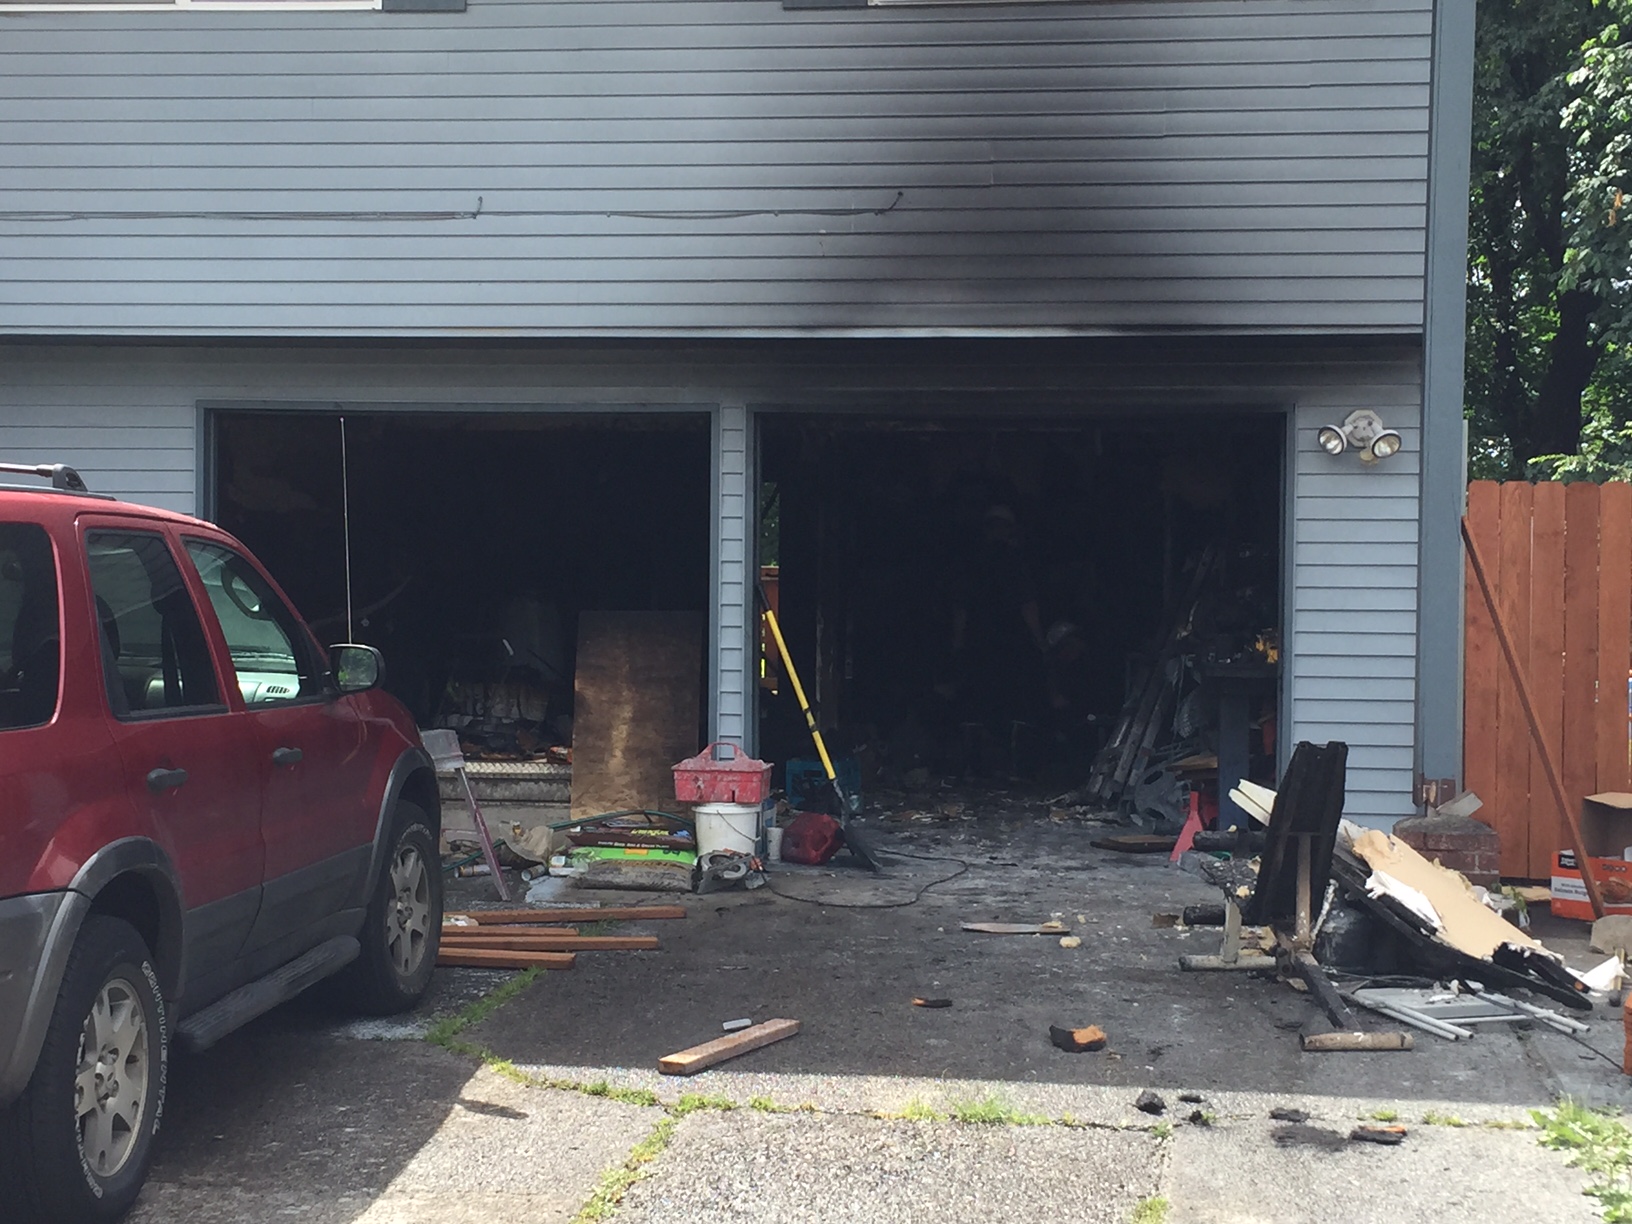 Vancouver firefighters brought a blaze in a garage under control in about 15 minutes. Three people were displaced as the house sustained smoke damage and power to the building had to be shut off because the electrical panel melted.